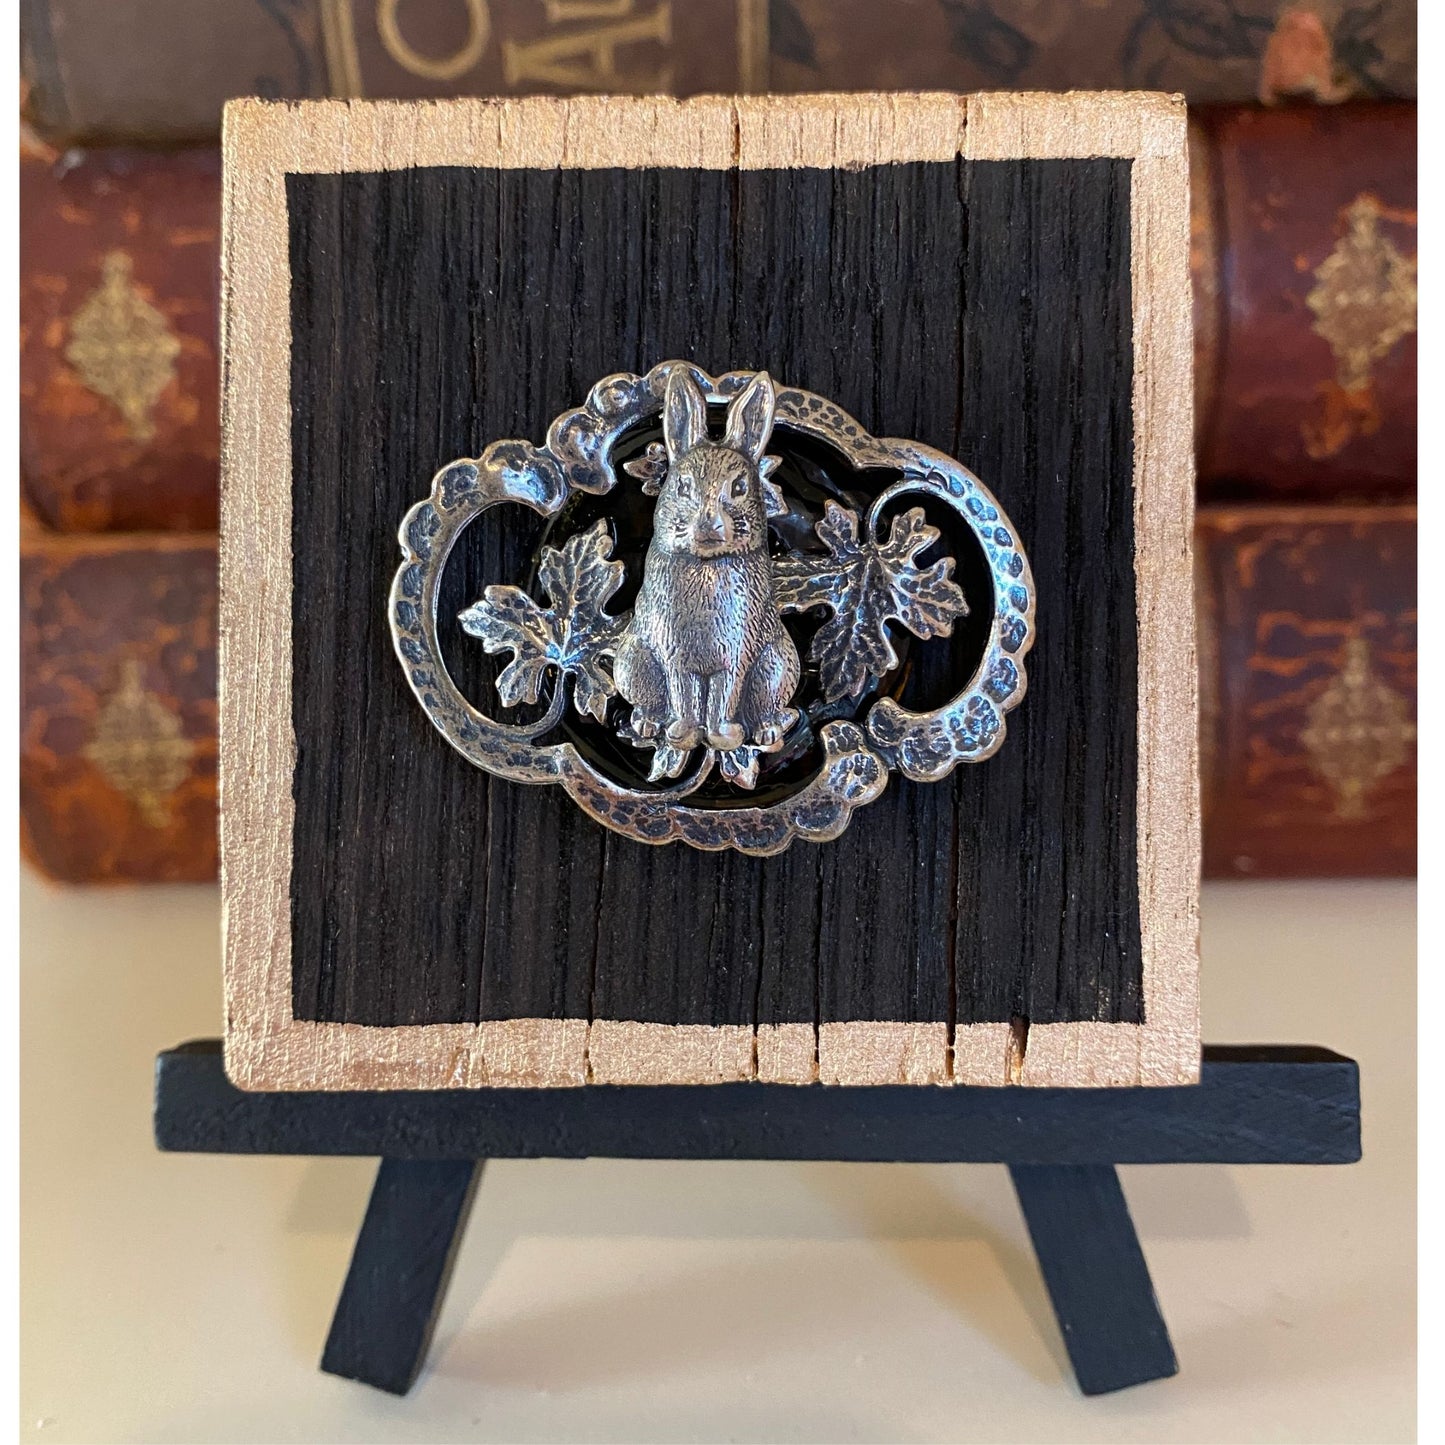 Bunny Gift, Bunny Wooden Art, Handcrafted, Silver Medallions, Whiskey Barrel Wood